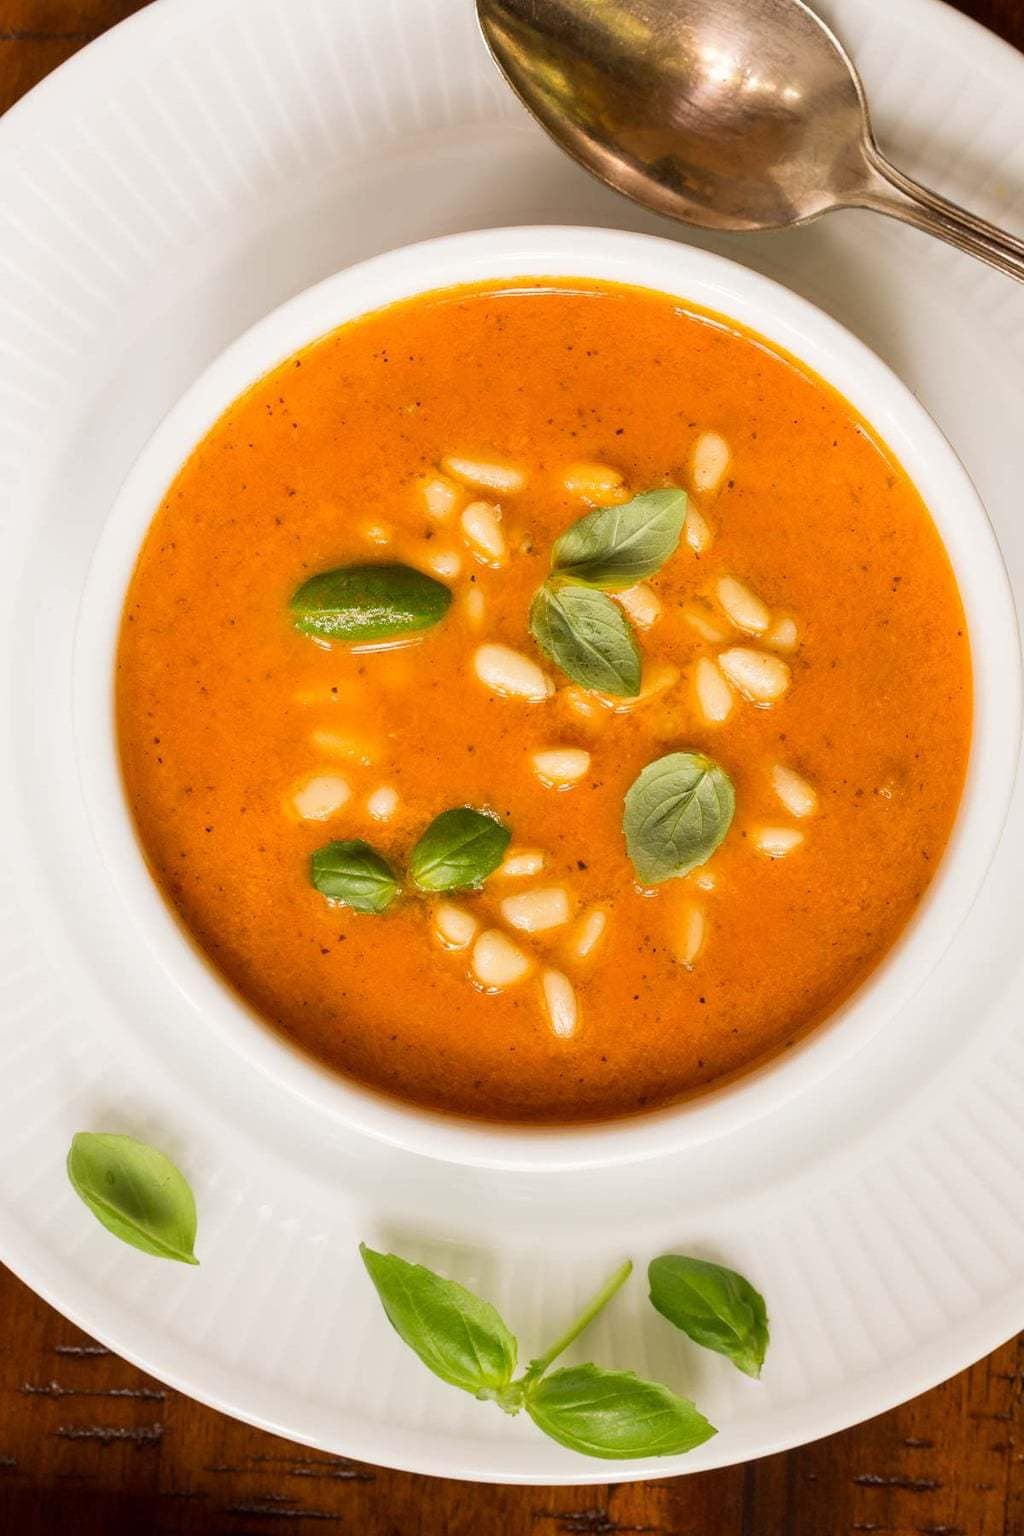 Overhead closeup photo of a bowl of Italian Sun Dried Tomato Soup in a white serving dish and plate. The plate and soup are garnished with fresh basil leaves.